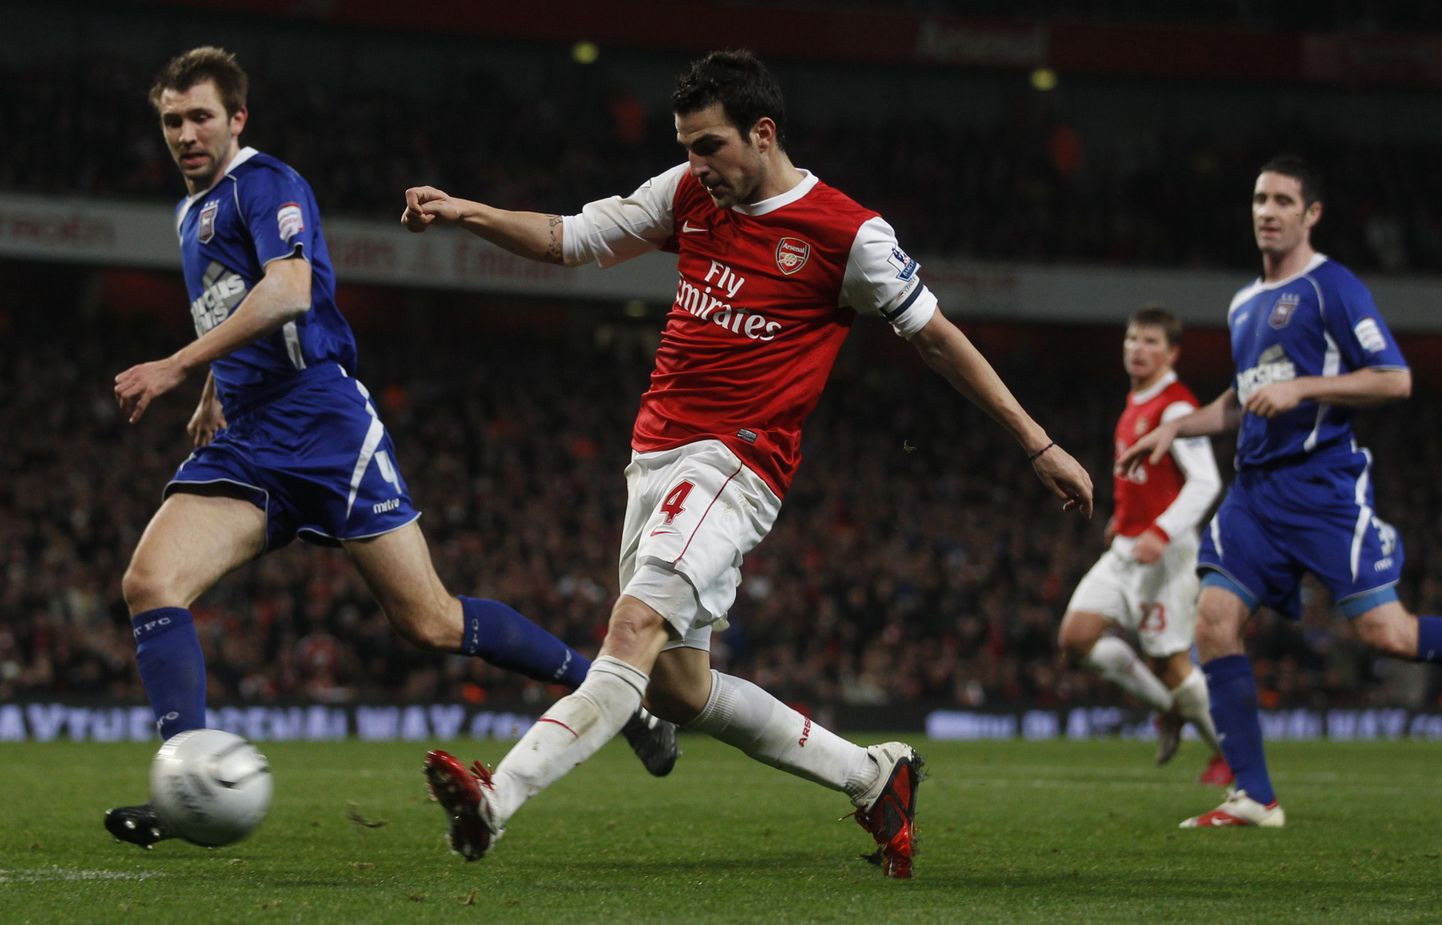 Arsenal's Cesc Fabregas scores past Ipswich Town's Gareth McAuley (L) during their English League Cup semi-final second leg soccer match at Emirates Stadium in London January 25, 2011. REUTERS/Eddie Keogh       (BRITAIN - Tags: SPORT SOCCER)